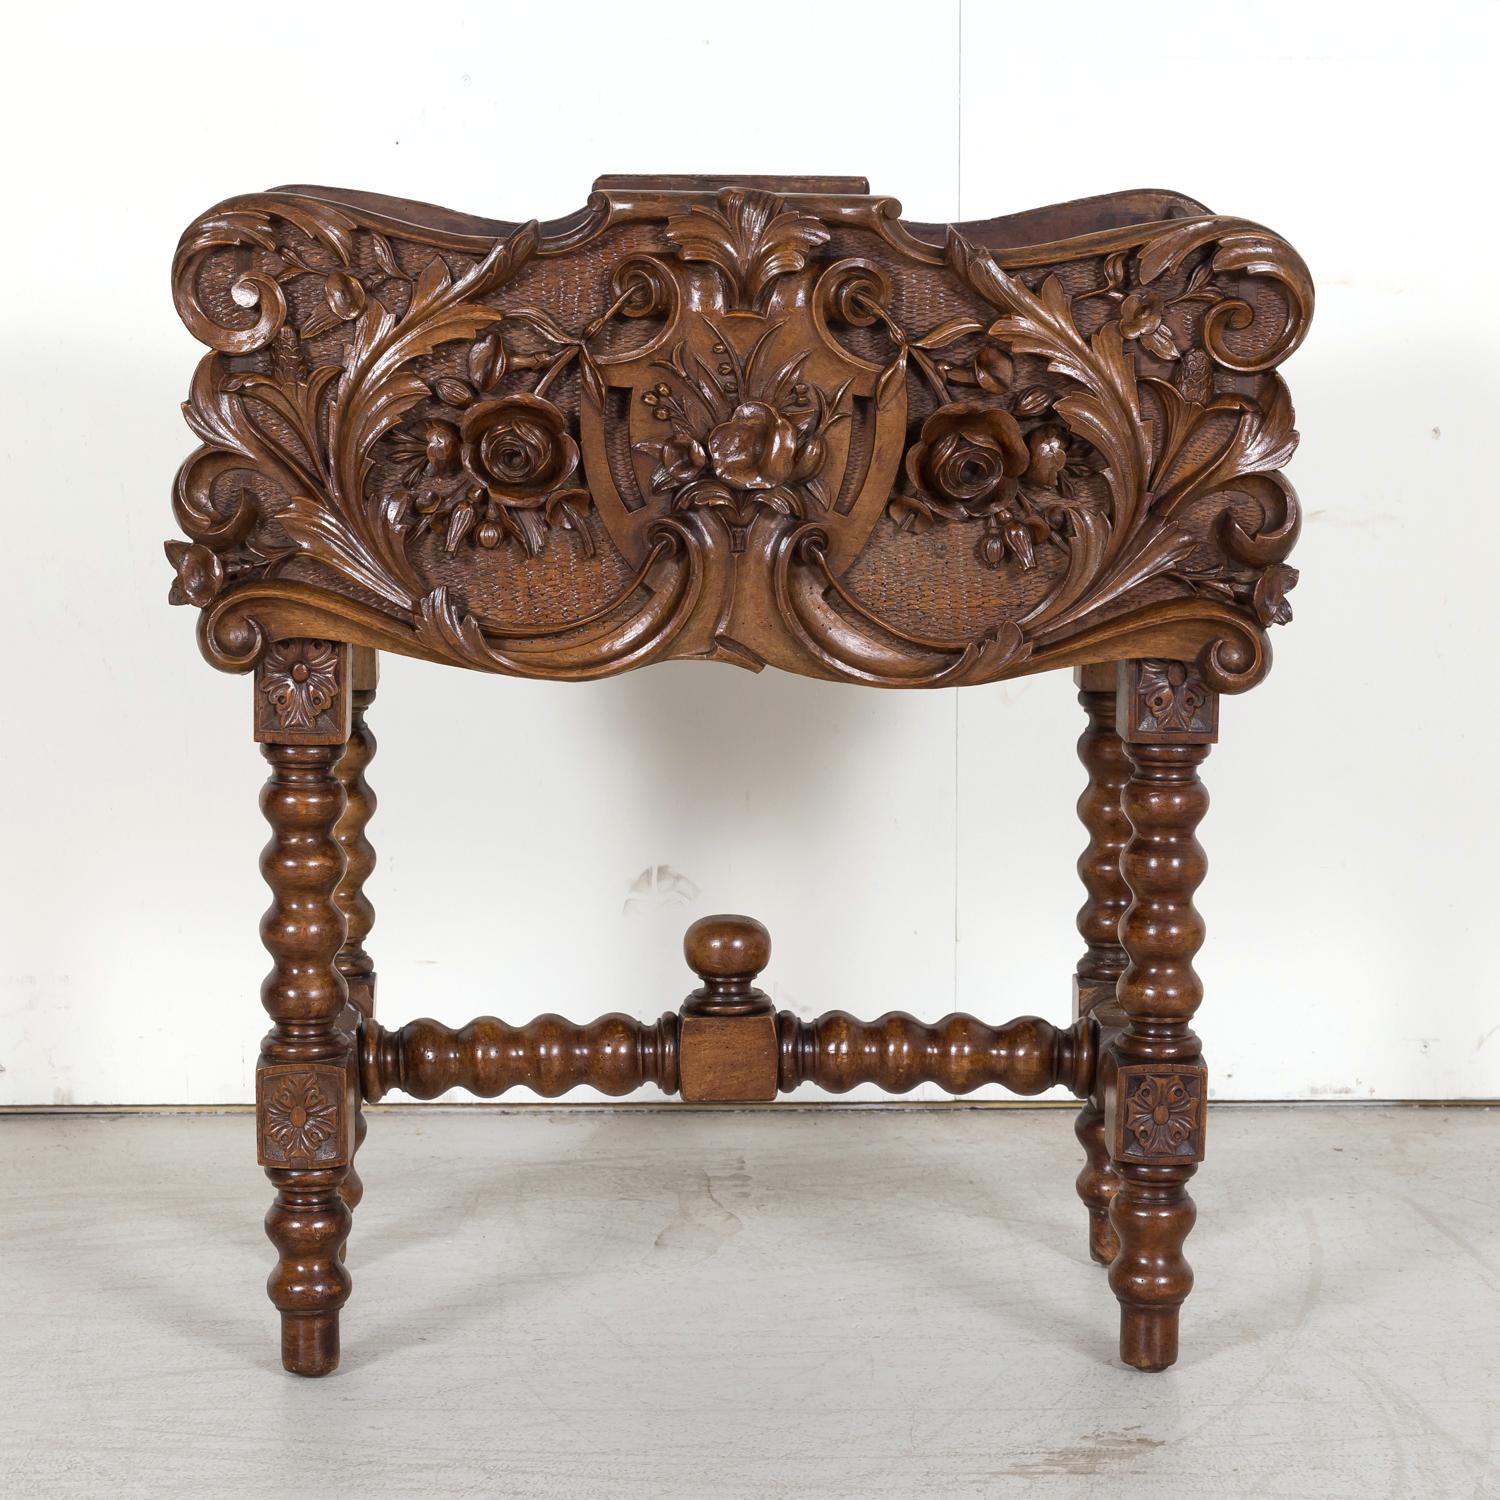 Hand-Carved 19th Century French Hand Carved Walnut Black Forest Jardiniére or Planter For Sale